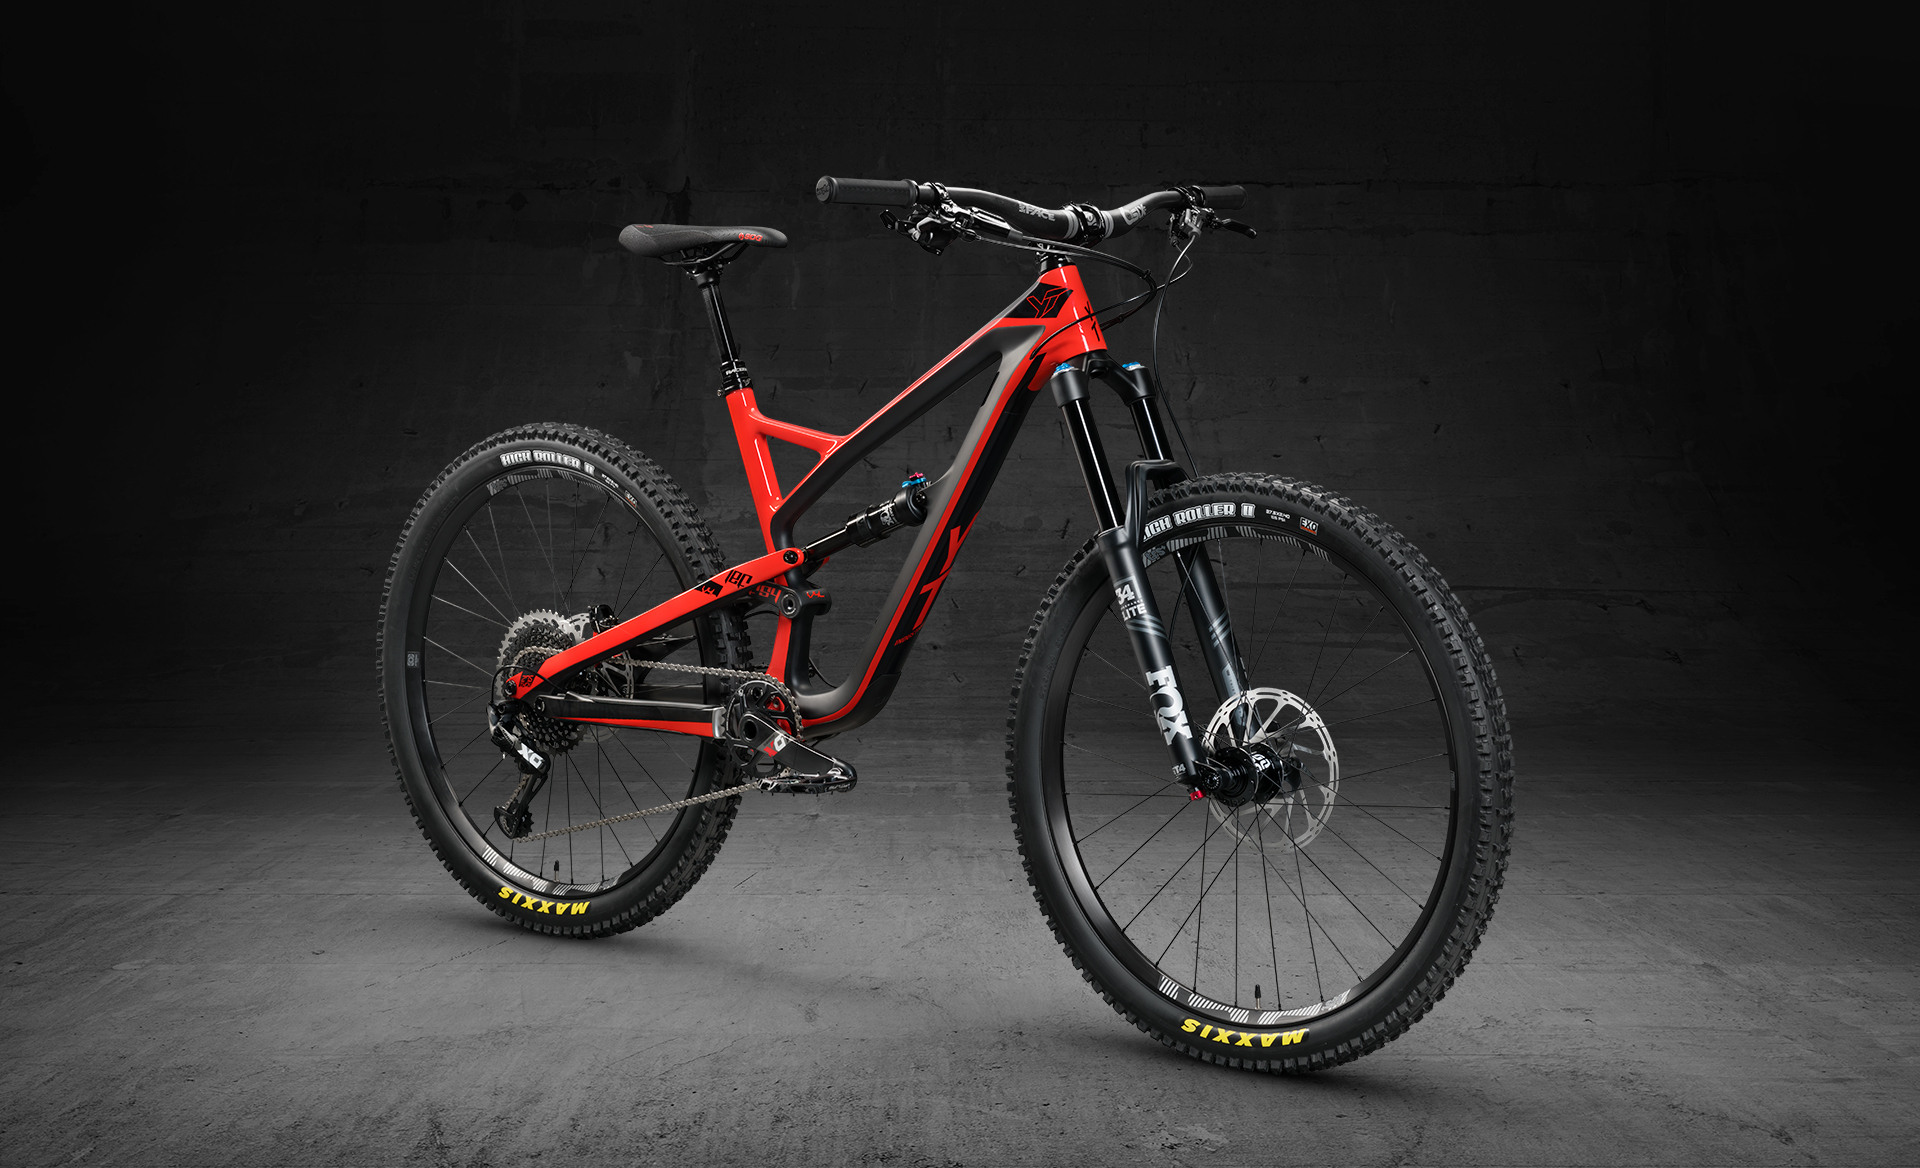 Jeffsy CF Pro - 150mm travel and a carbon frame for $6,899 NZD